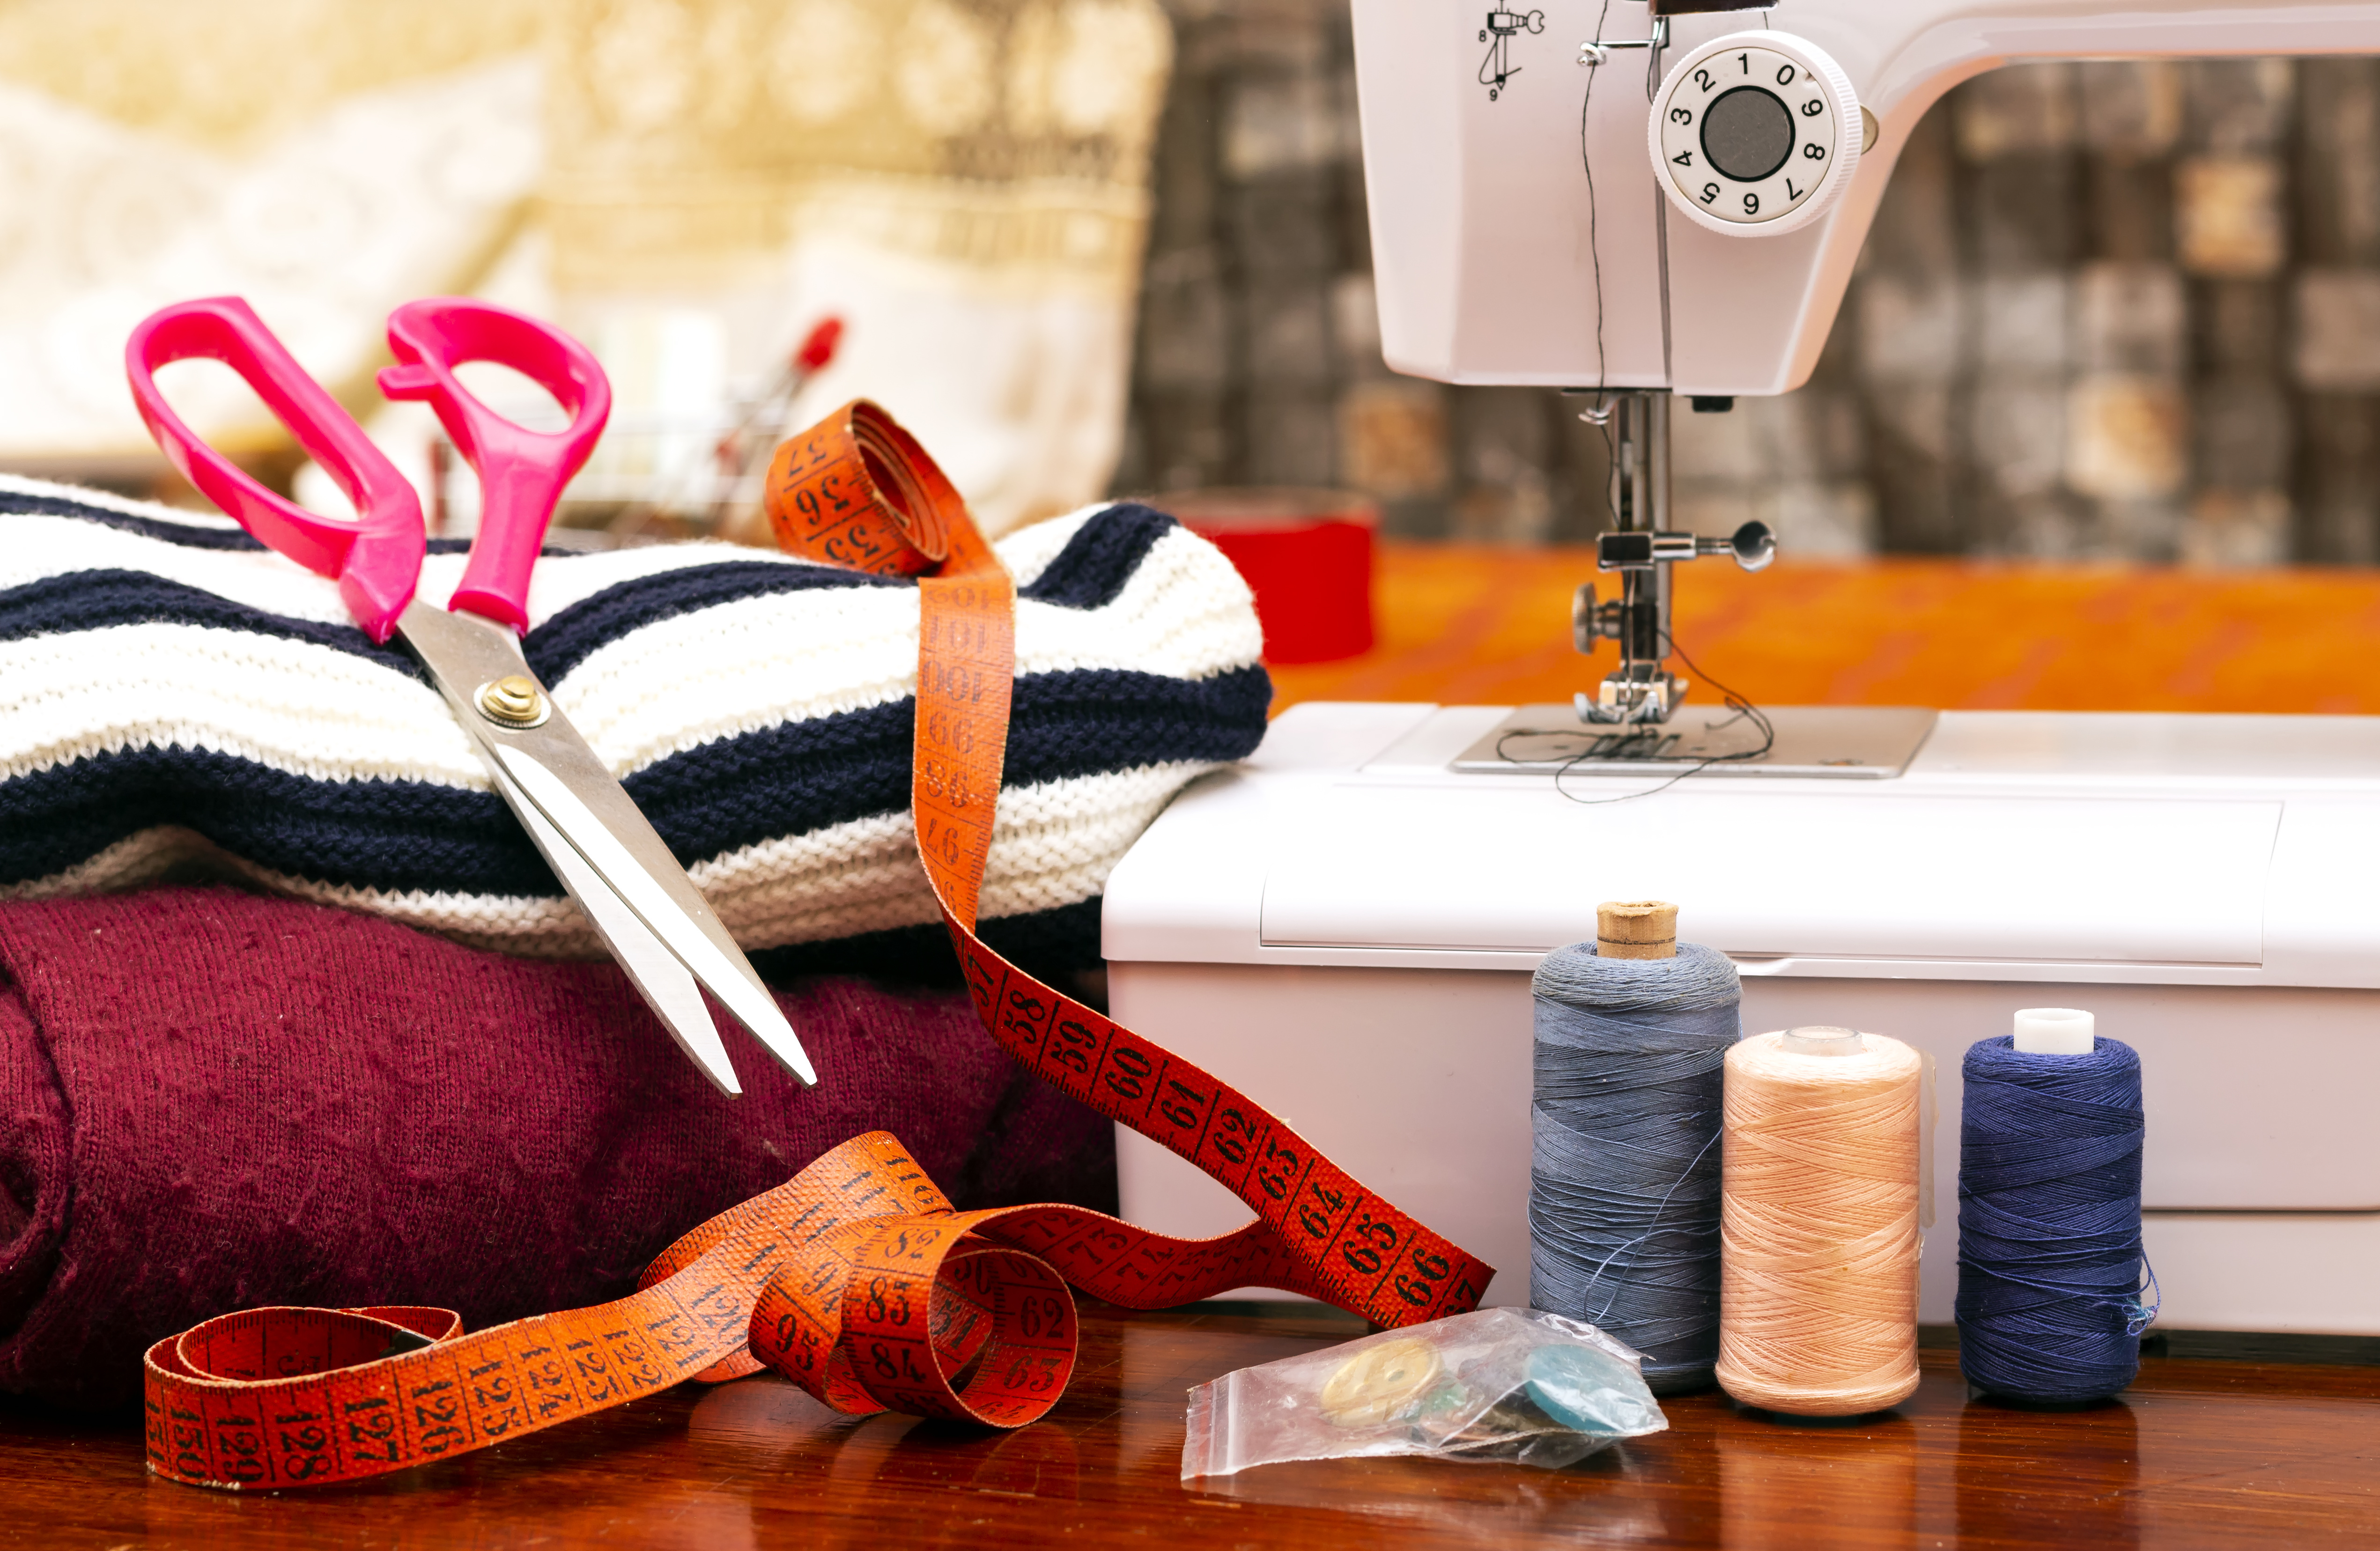 Sewing - How to Make Your Own Alterations | Arkansas State University ...